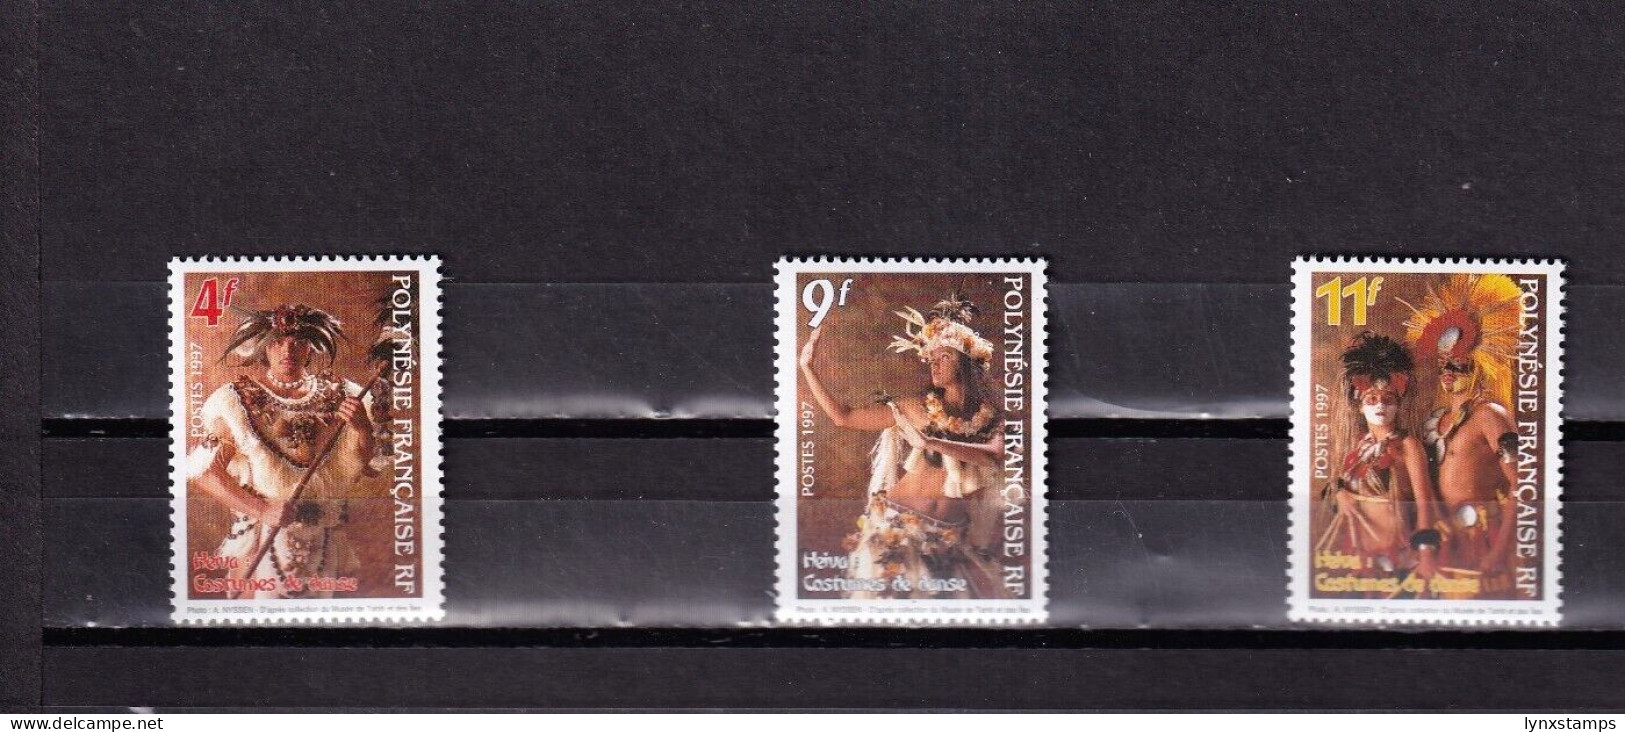 ER04 French Polynesia 1997 Costumes And Dances MNH Stamps - Usati